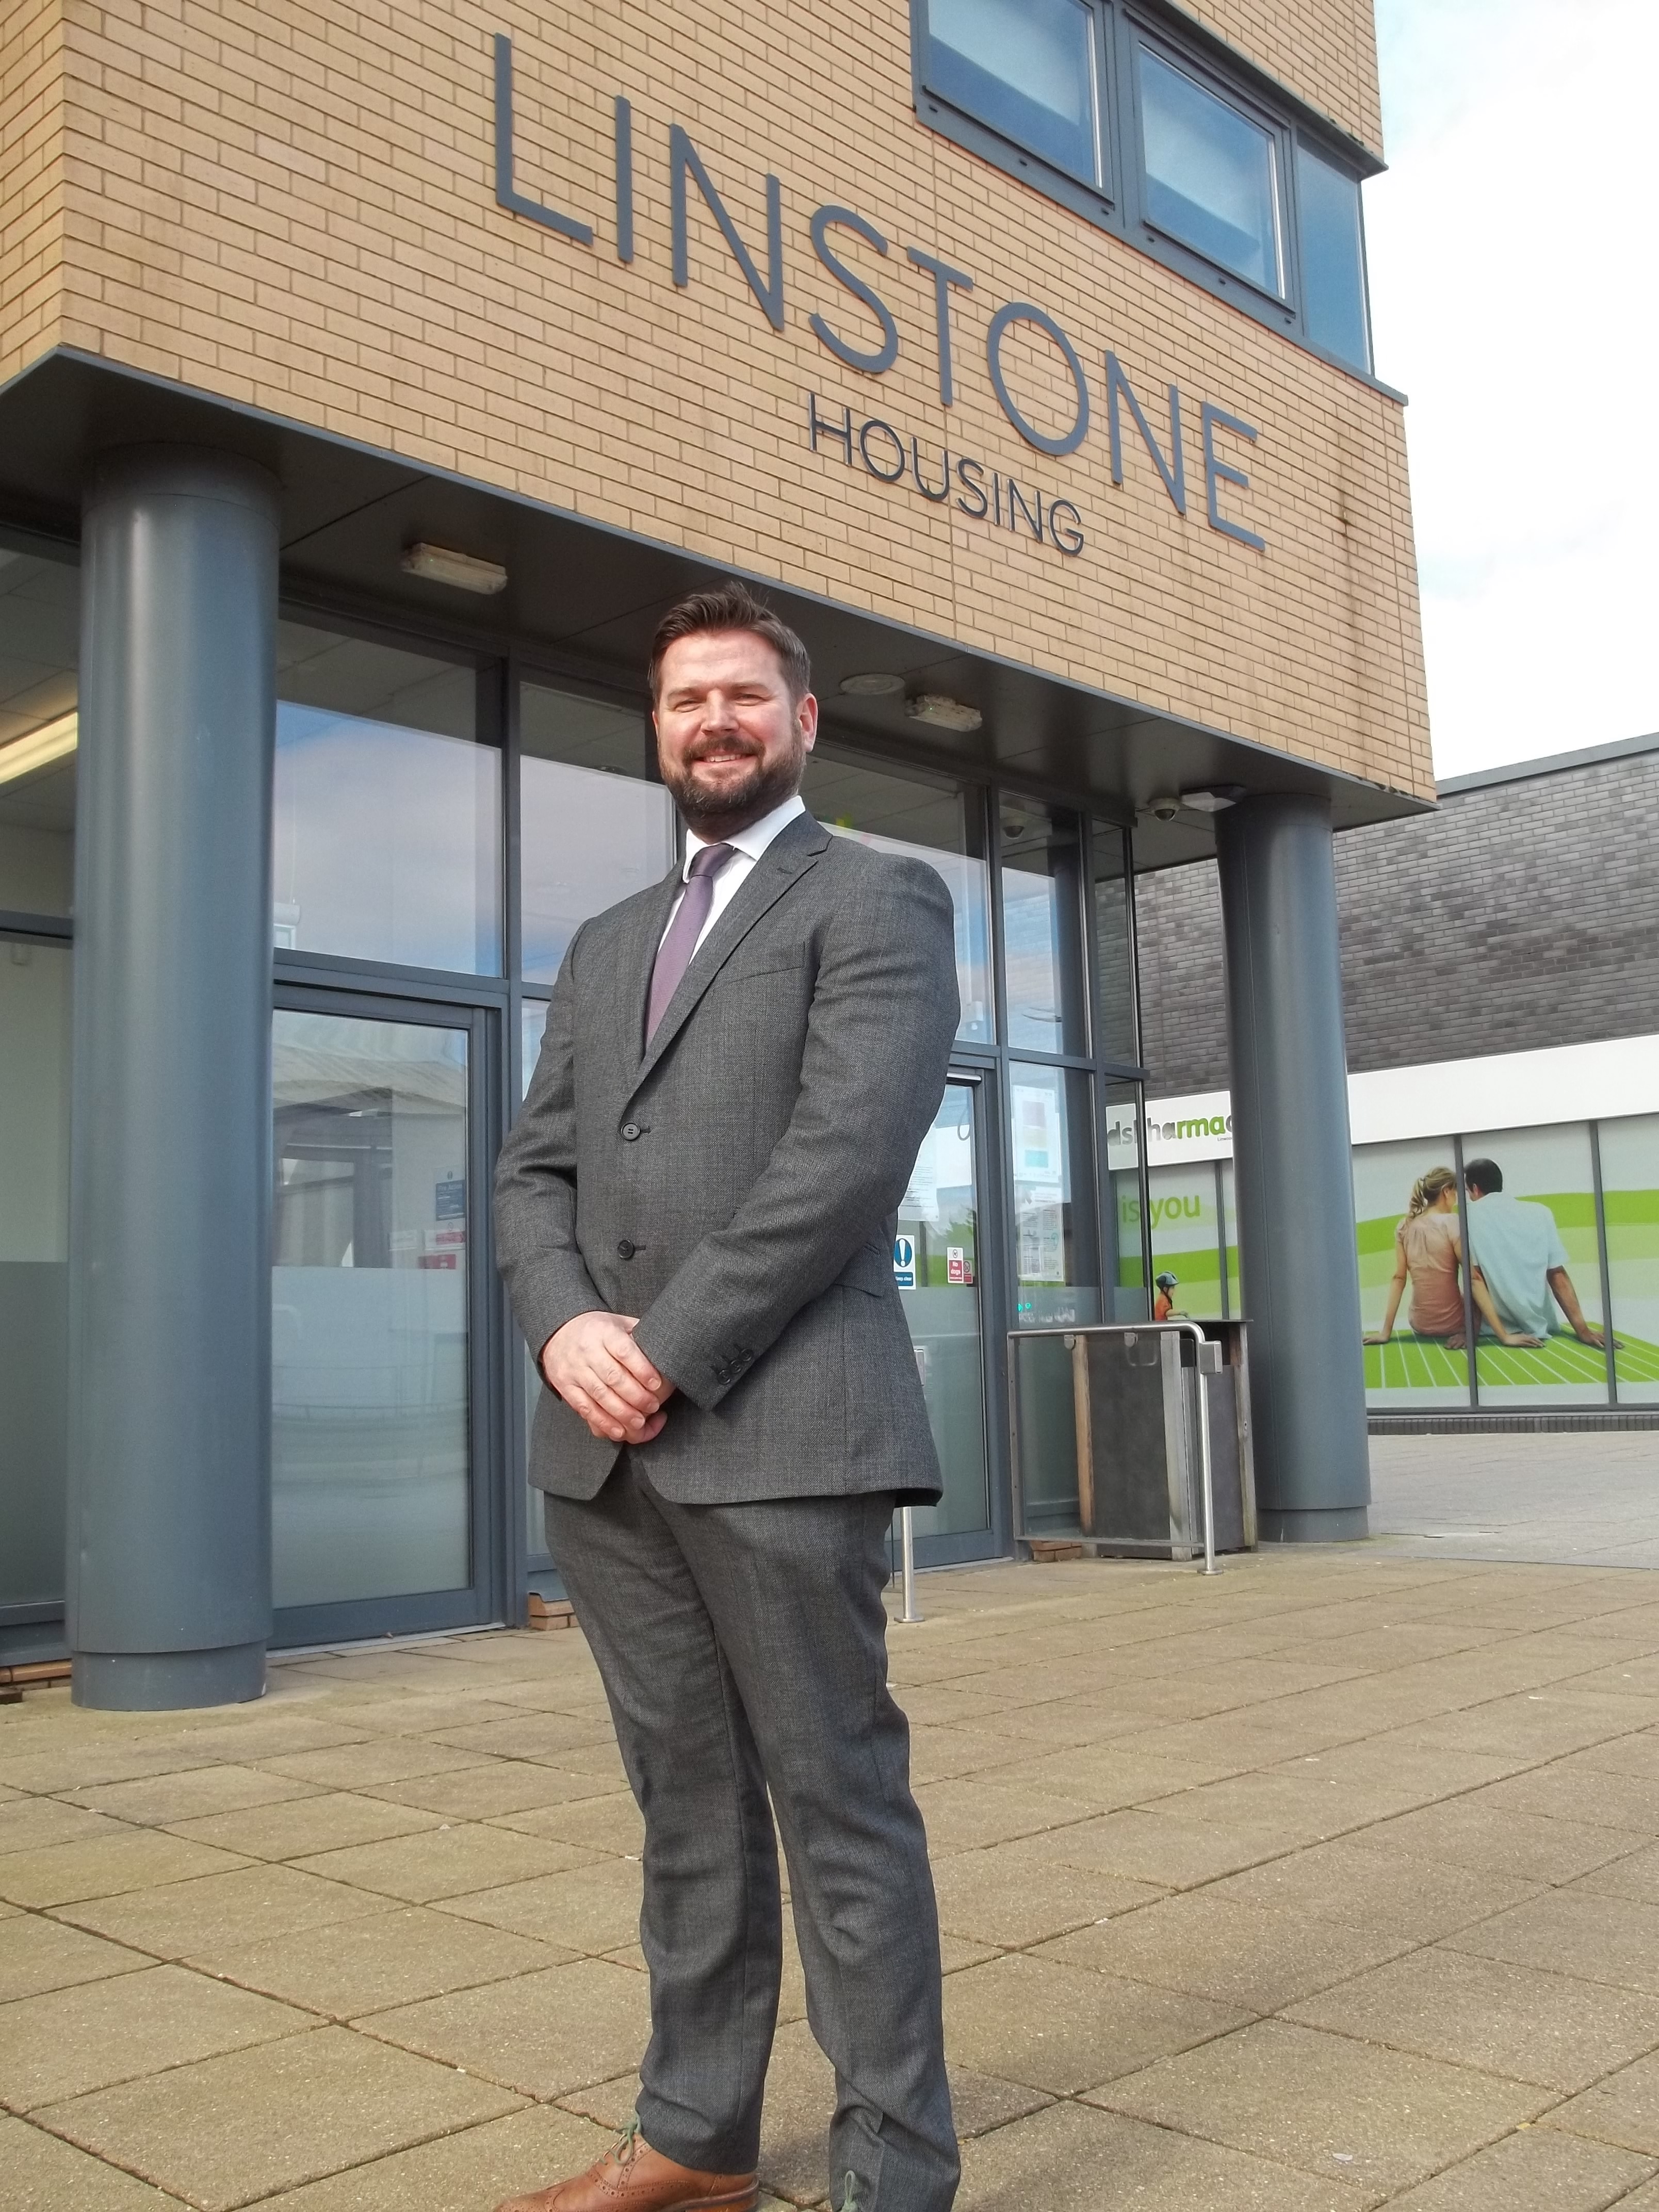 Linstone appoints Frank Boyle as new director of property and assets